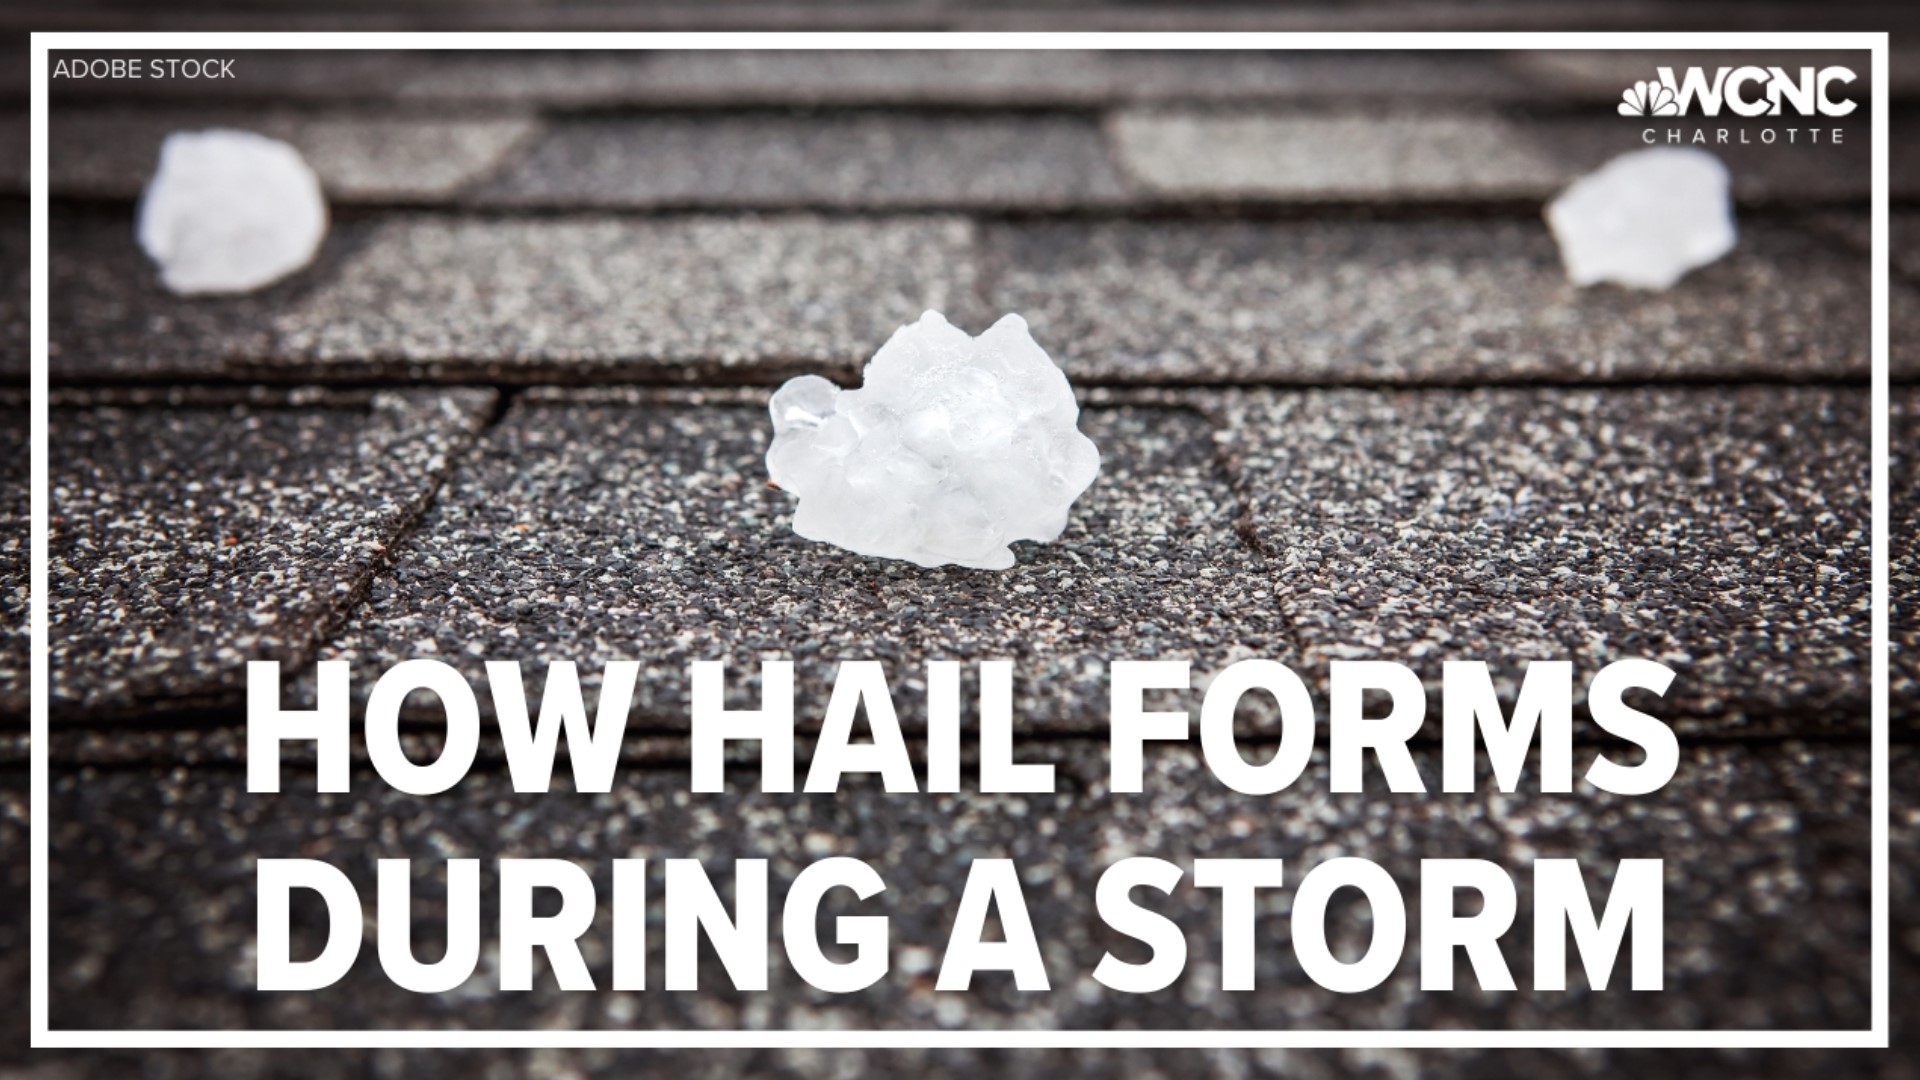 If you see hail on the ground and it's safe to do so, break it open. The number of rings you see will tell you how many cycles it went through in the thunderstorm.